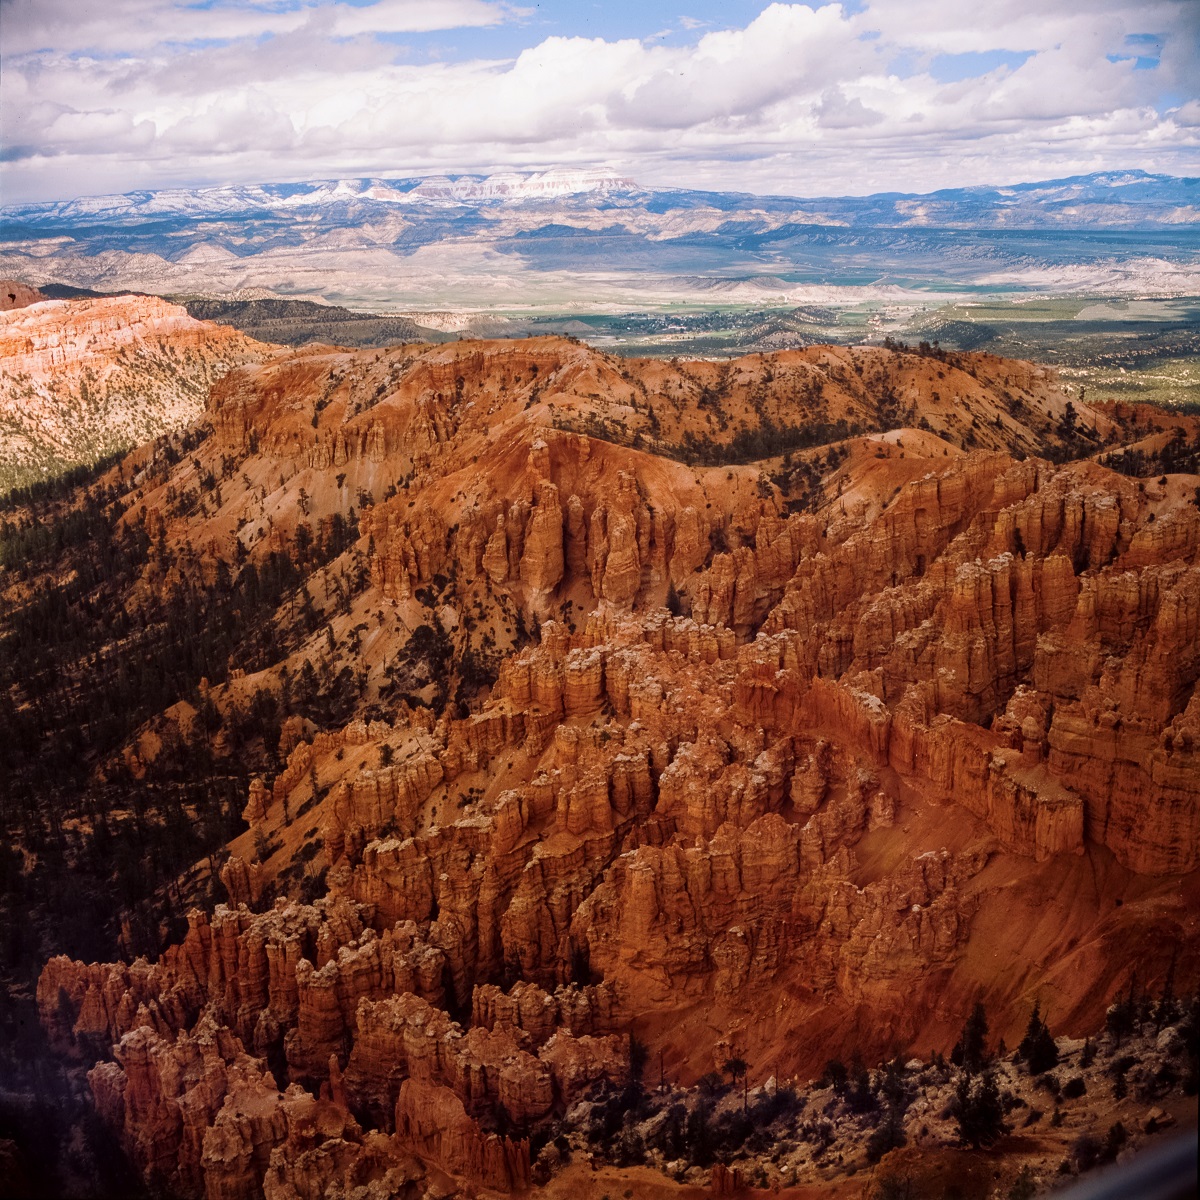 My vote is for Bryce Canyon in Utah. It's breathtaking.